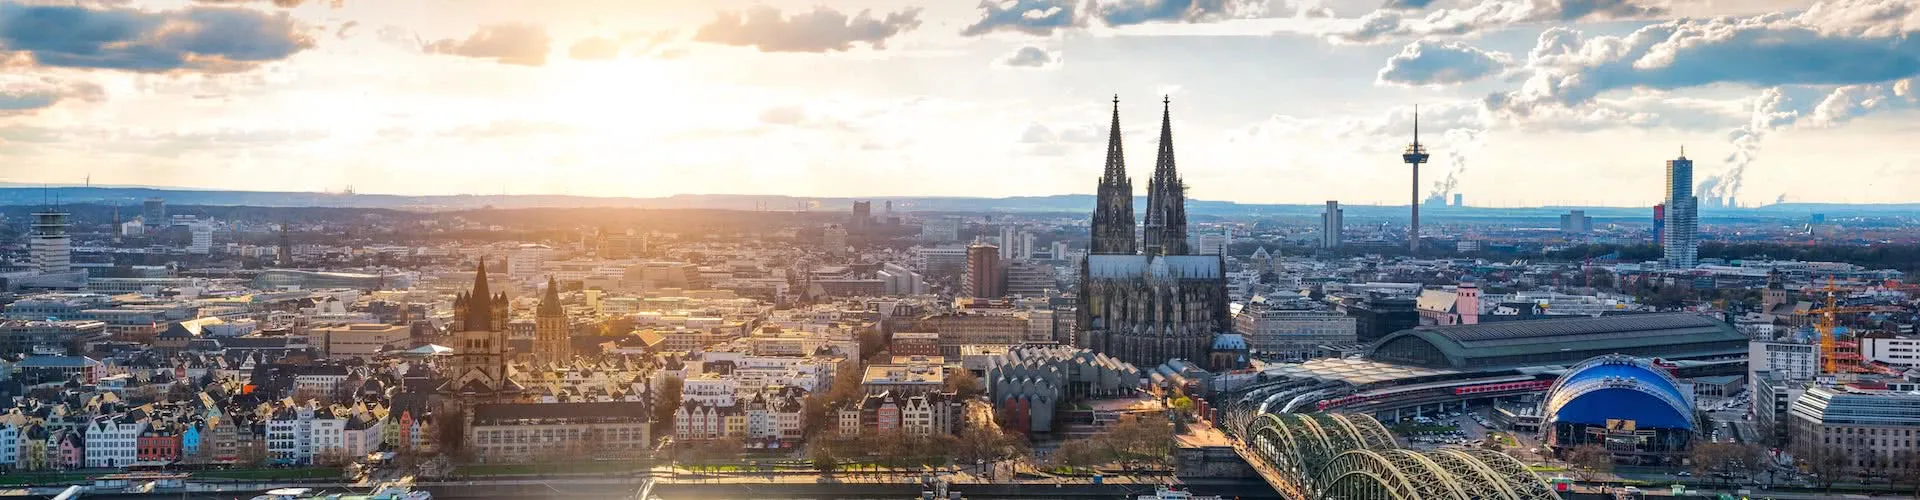 Cologne - the destination with youth hostels